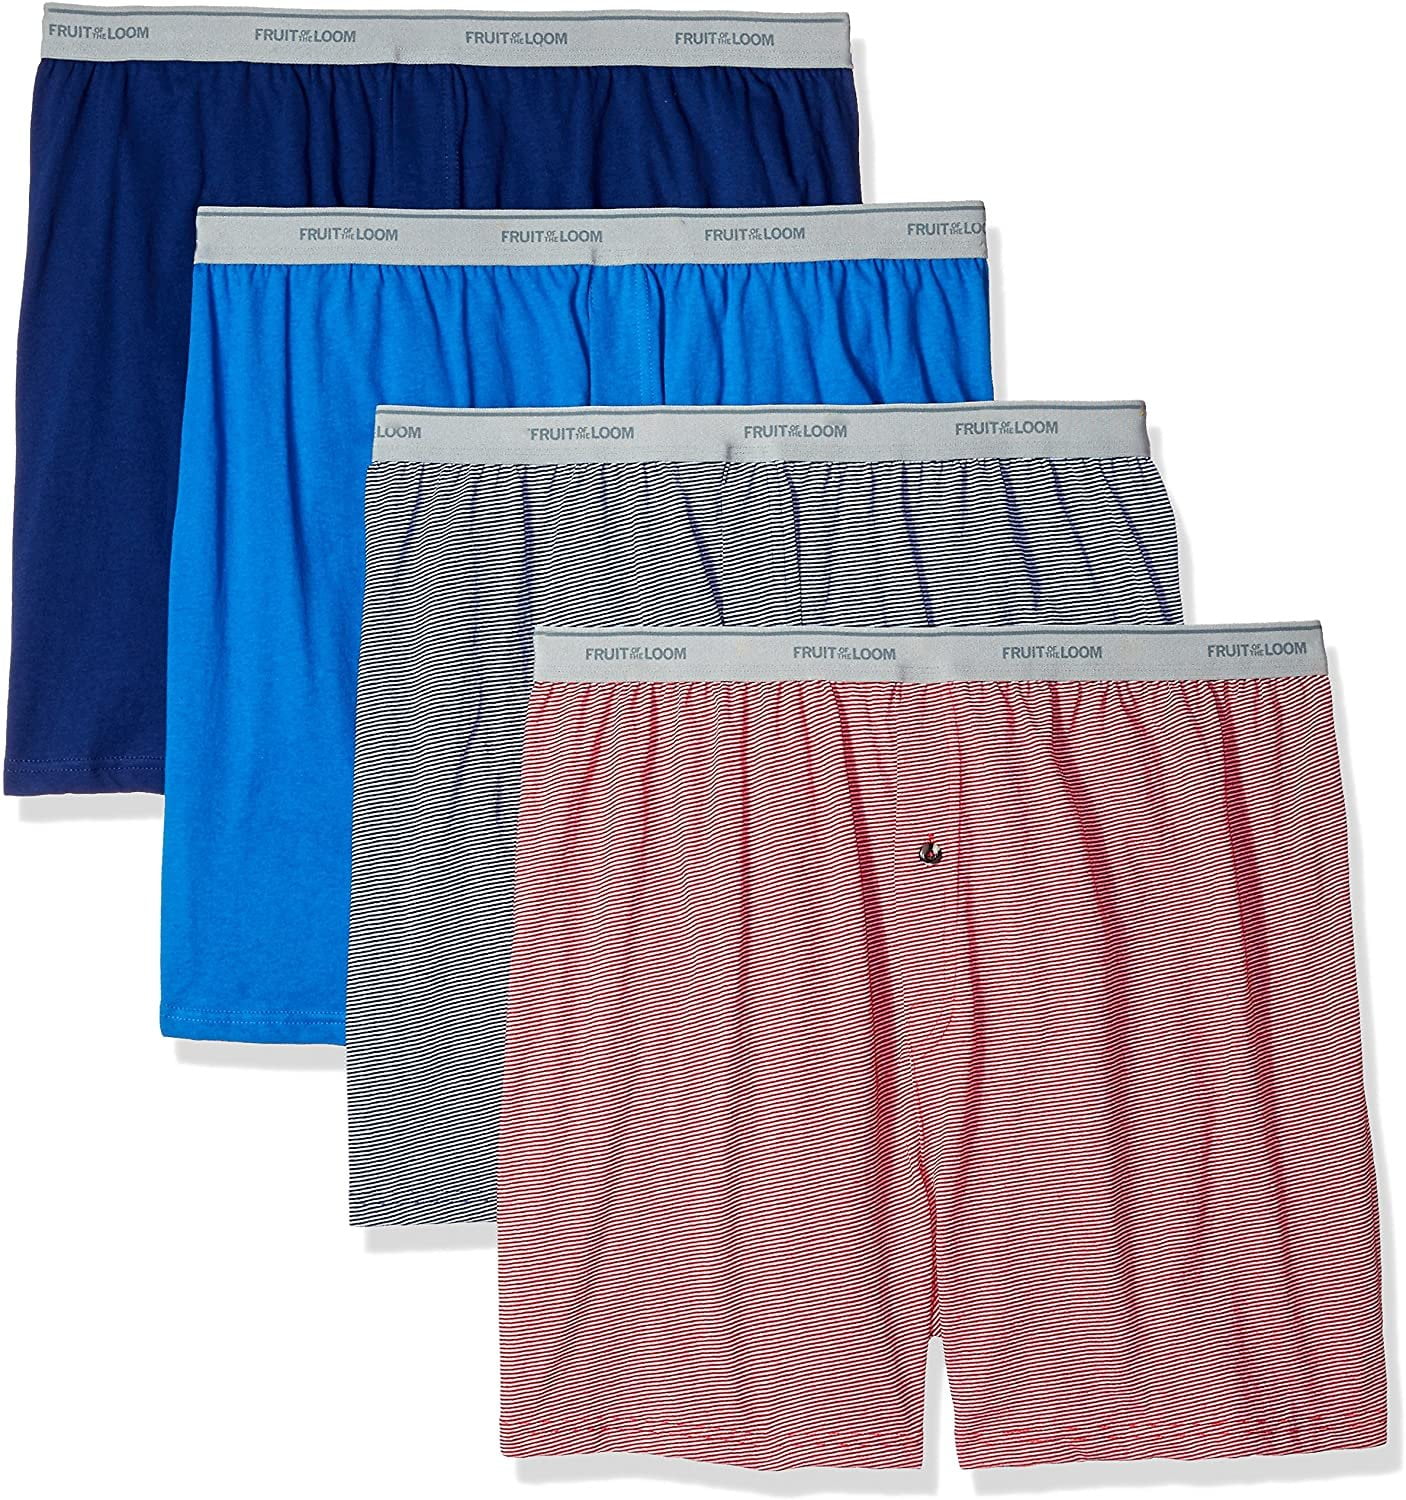 Fruit of the Loom Men's Assorted Knit Boxers Extended Sizes, 4 Pack ...